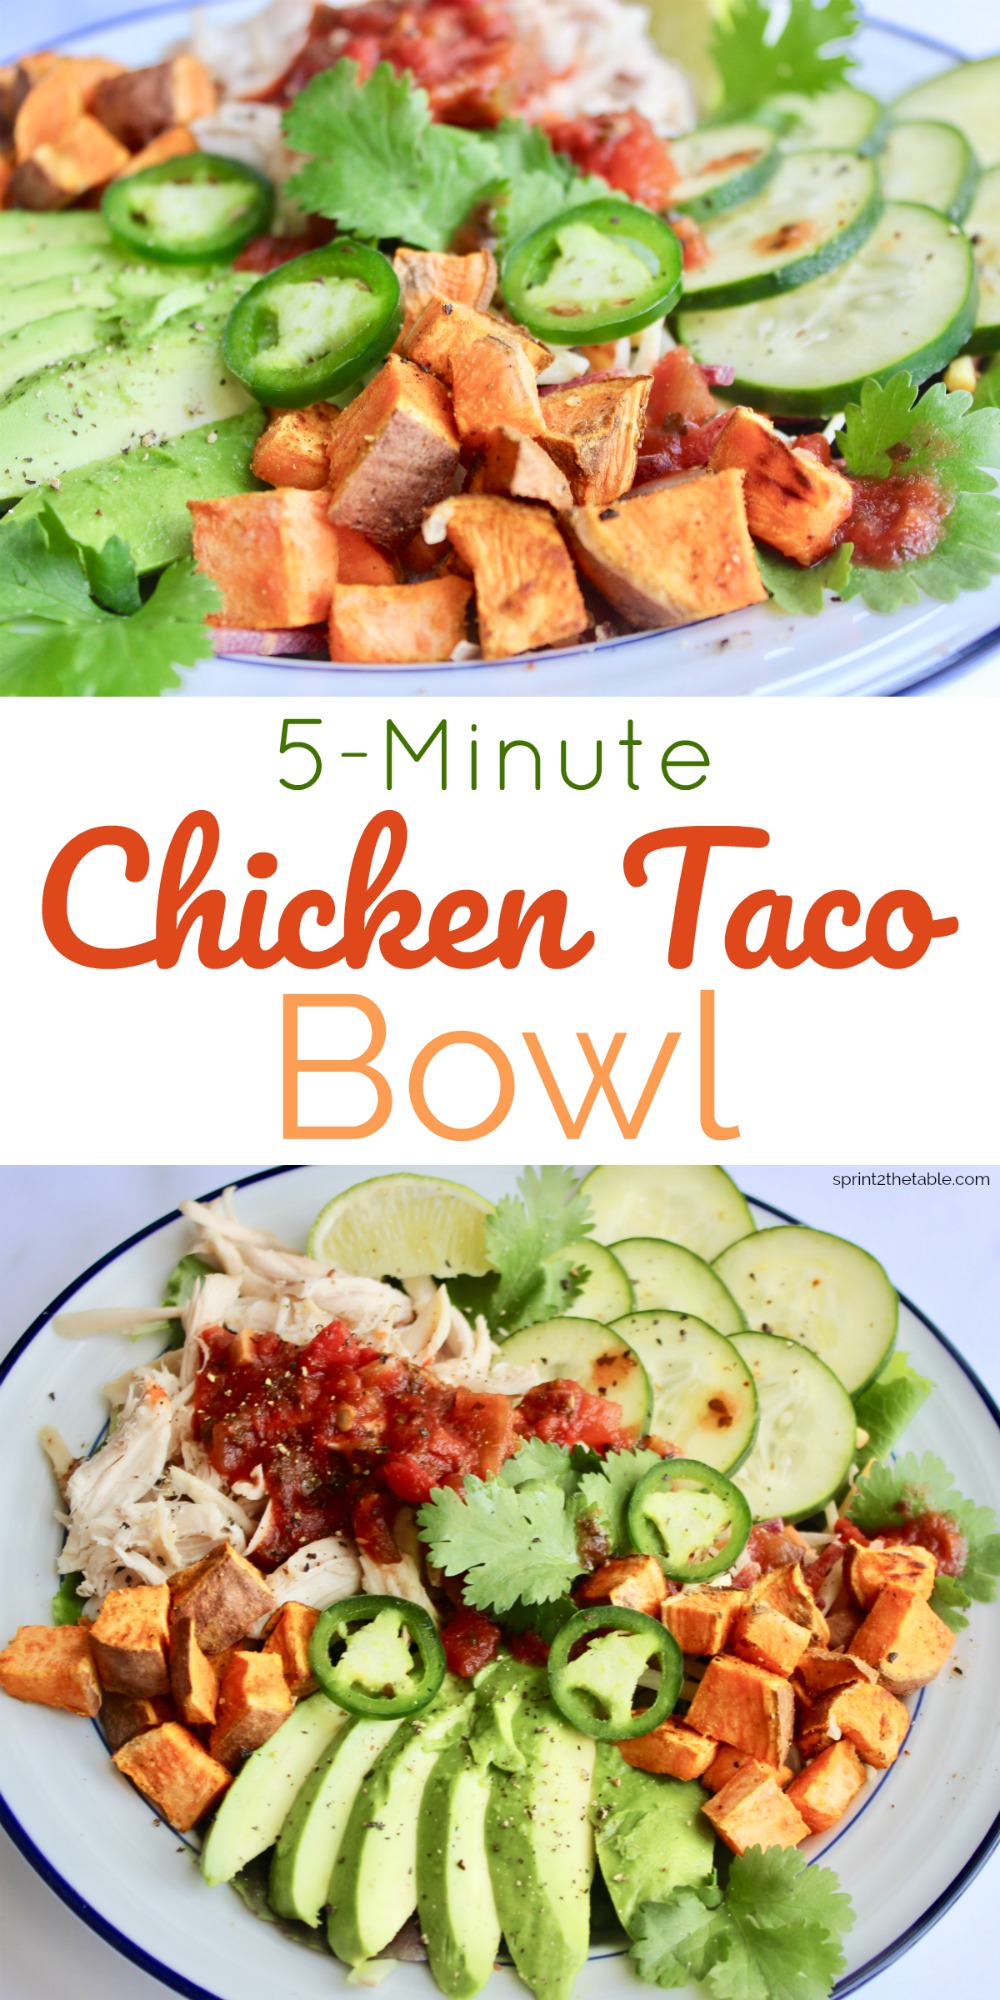 This 5-minute chicken taco bowl recipe is easy to make and full of flavor.  It literally comes together in 5 minutes, which is perfect for weeknight dinners!